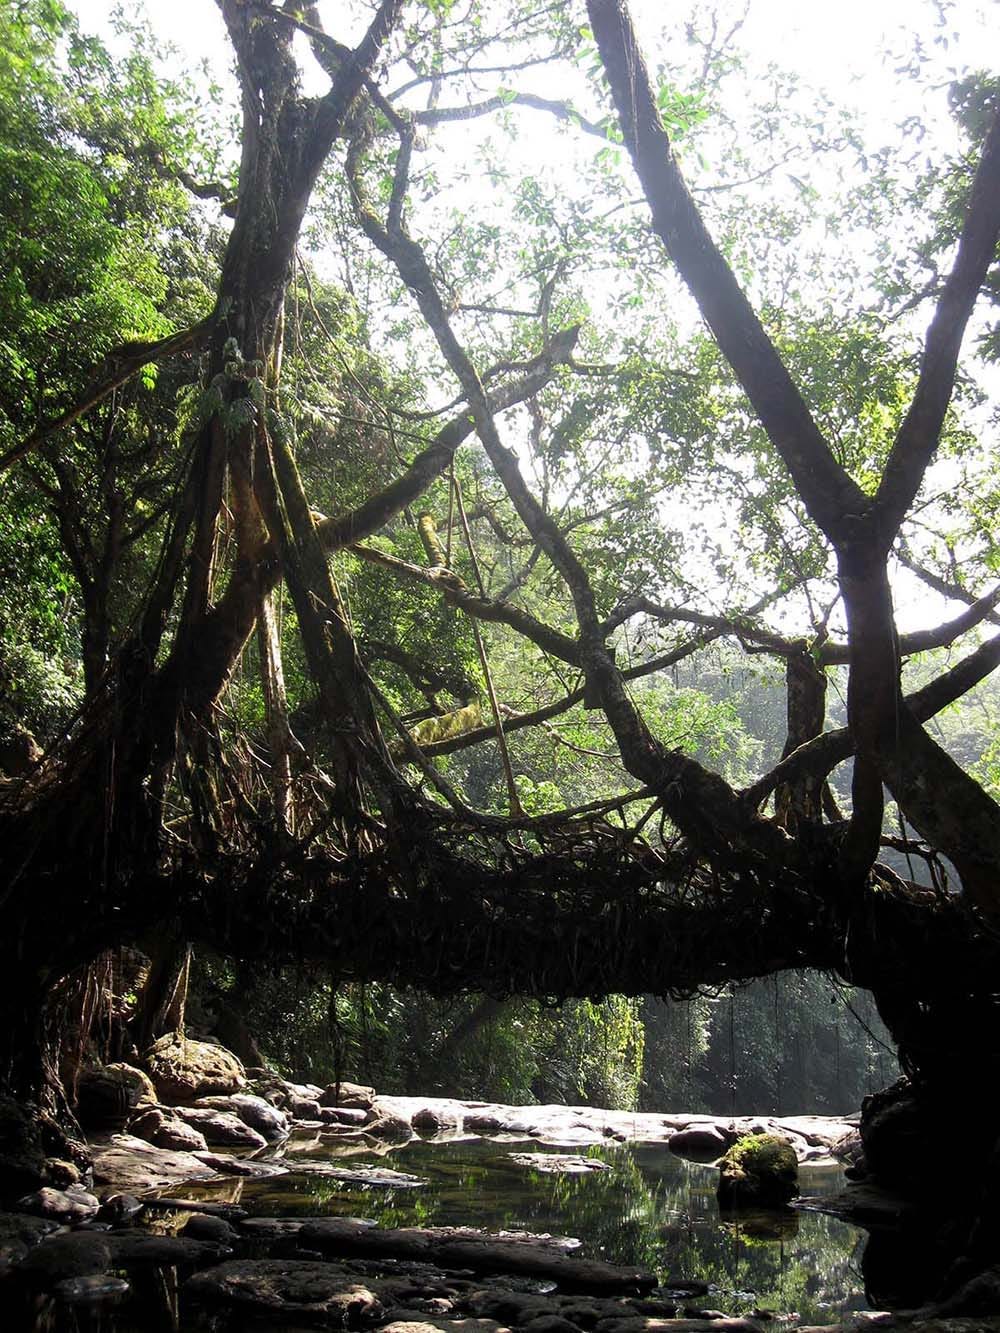 The living bridges stand as a testament to the unique interaction between people and nature in Meghalaya.